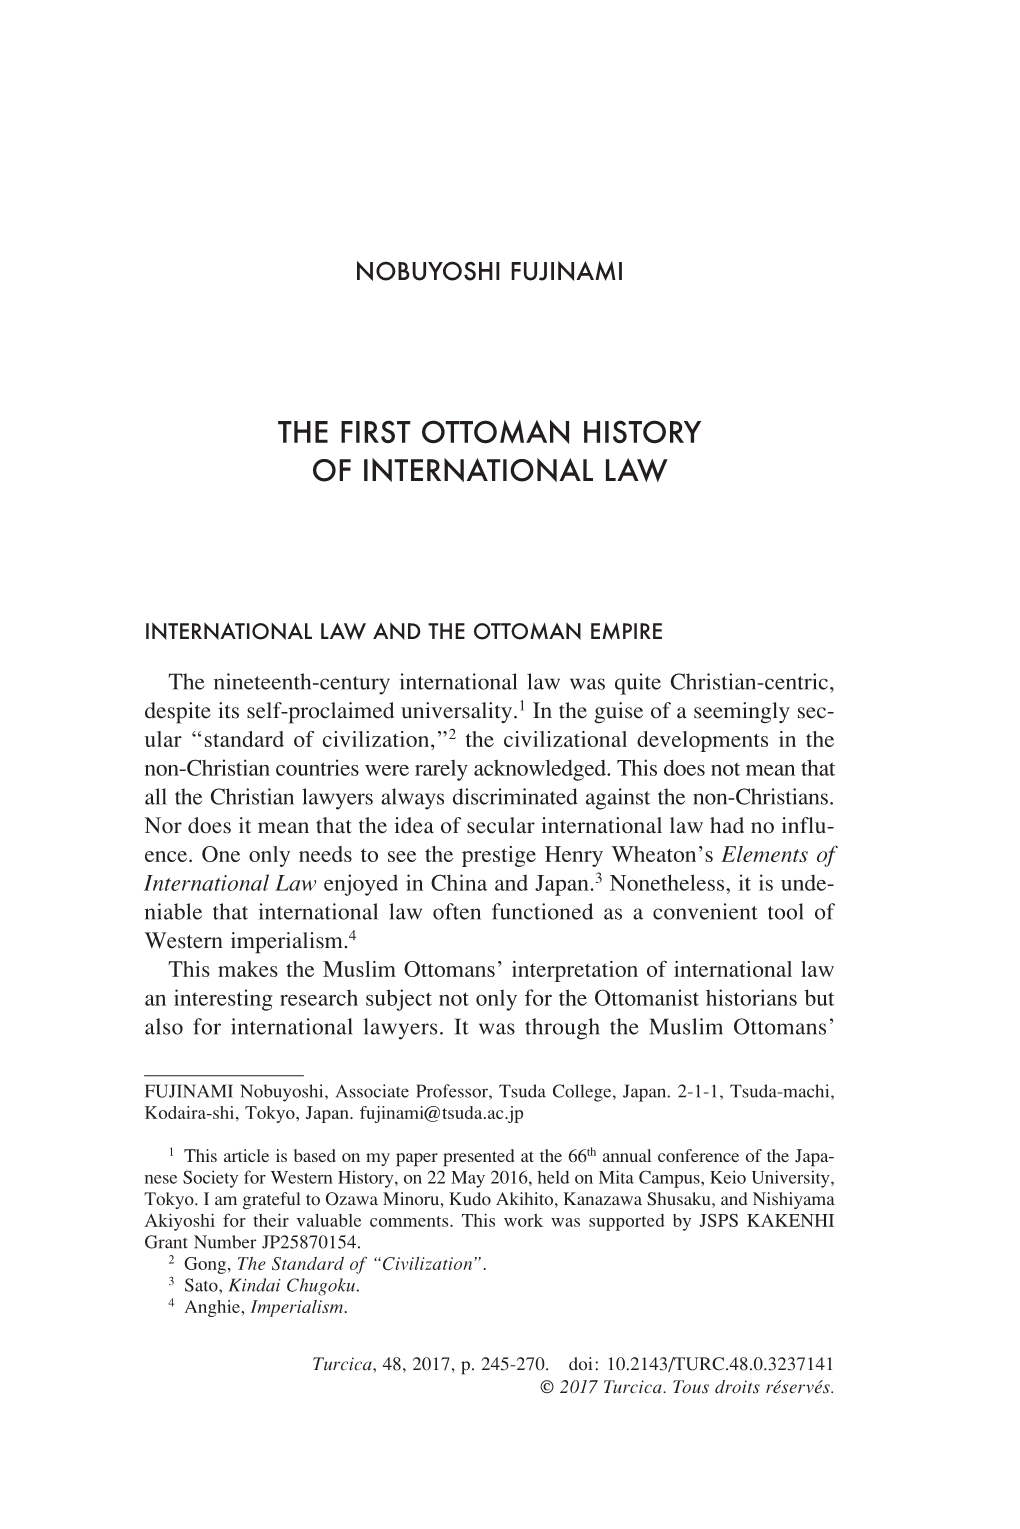 The First Ottoman History of International Law